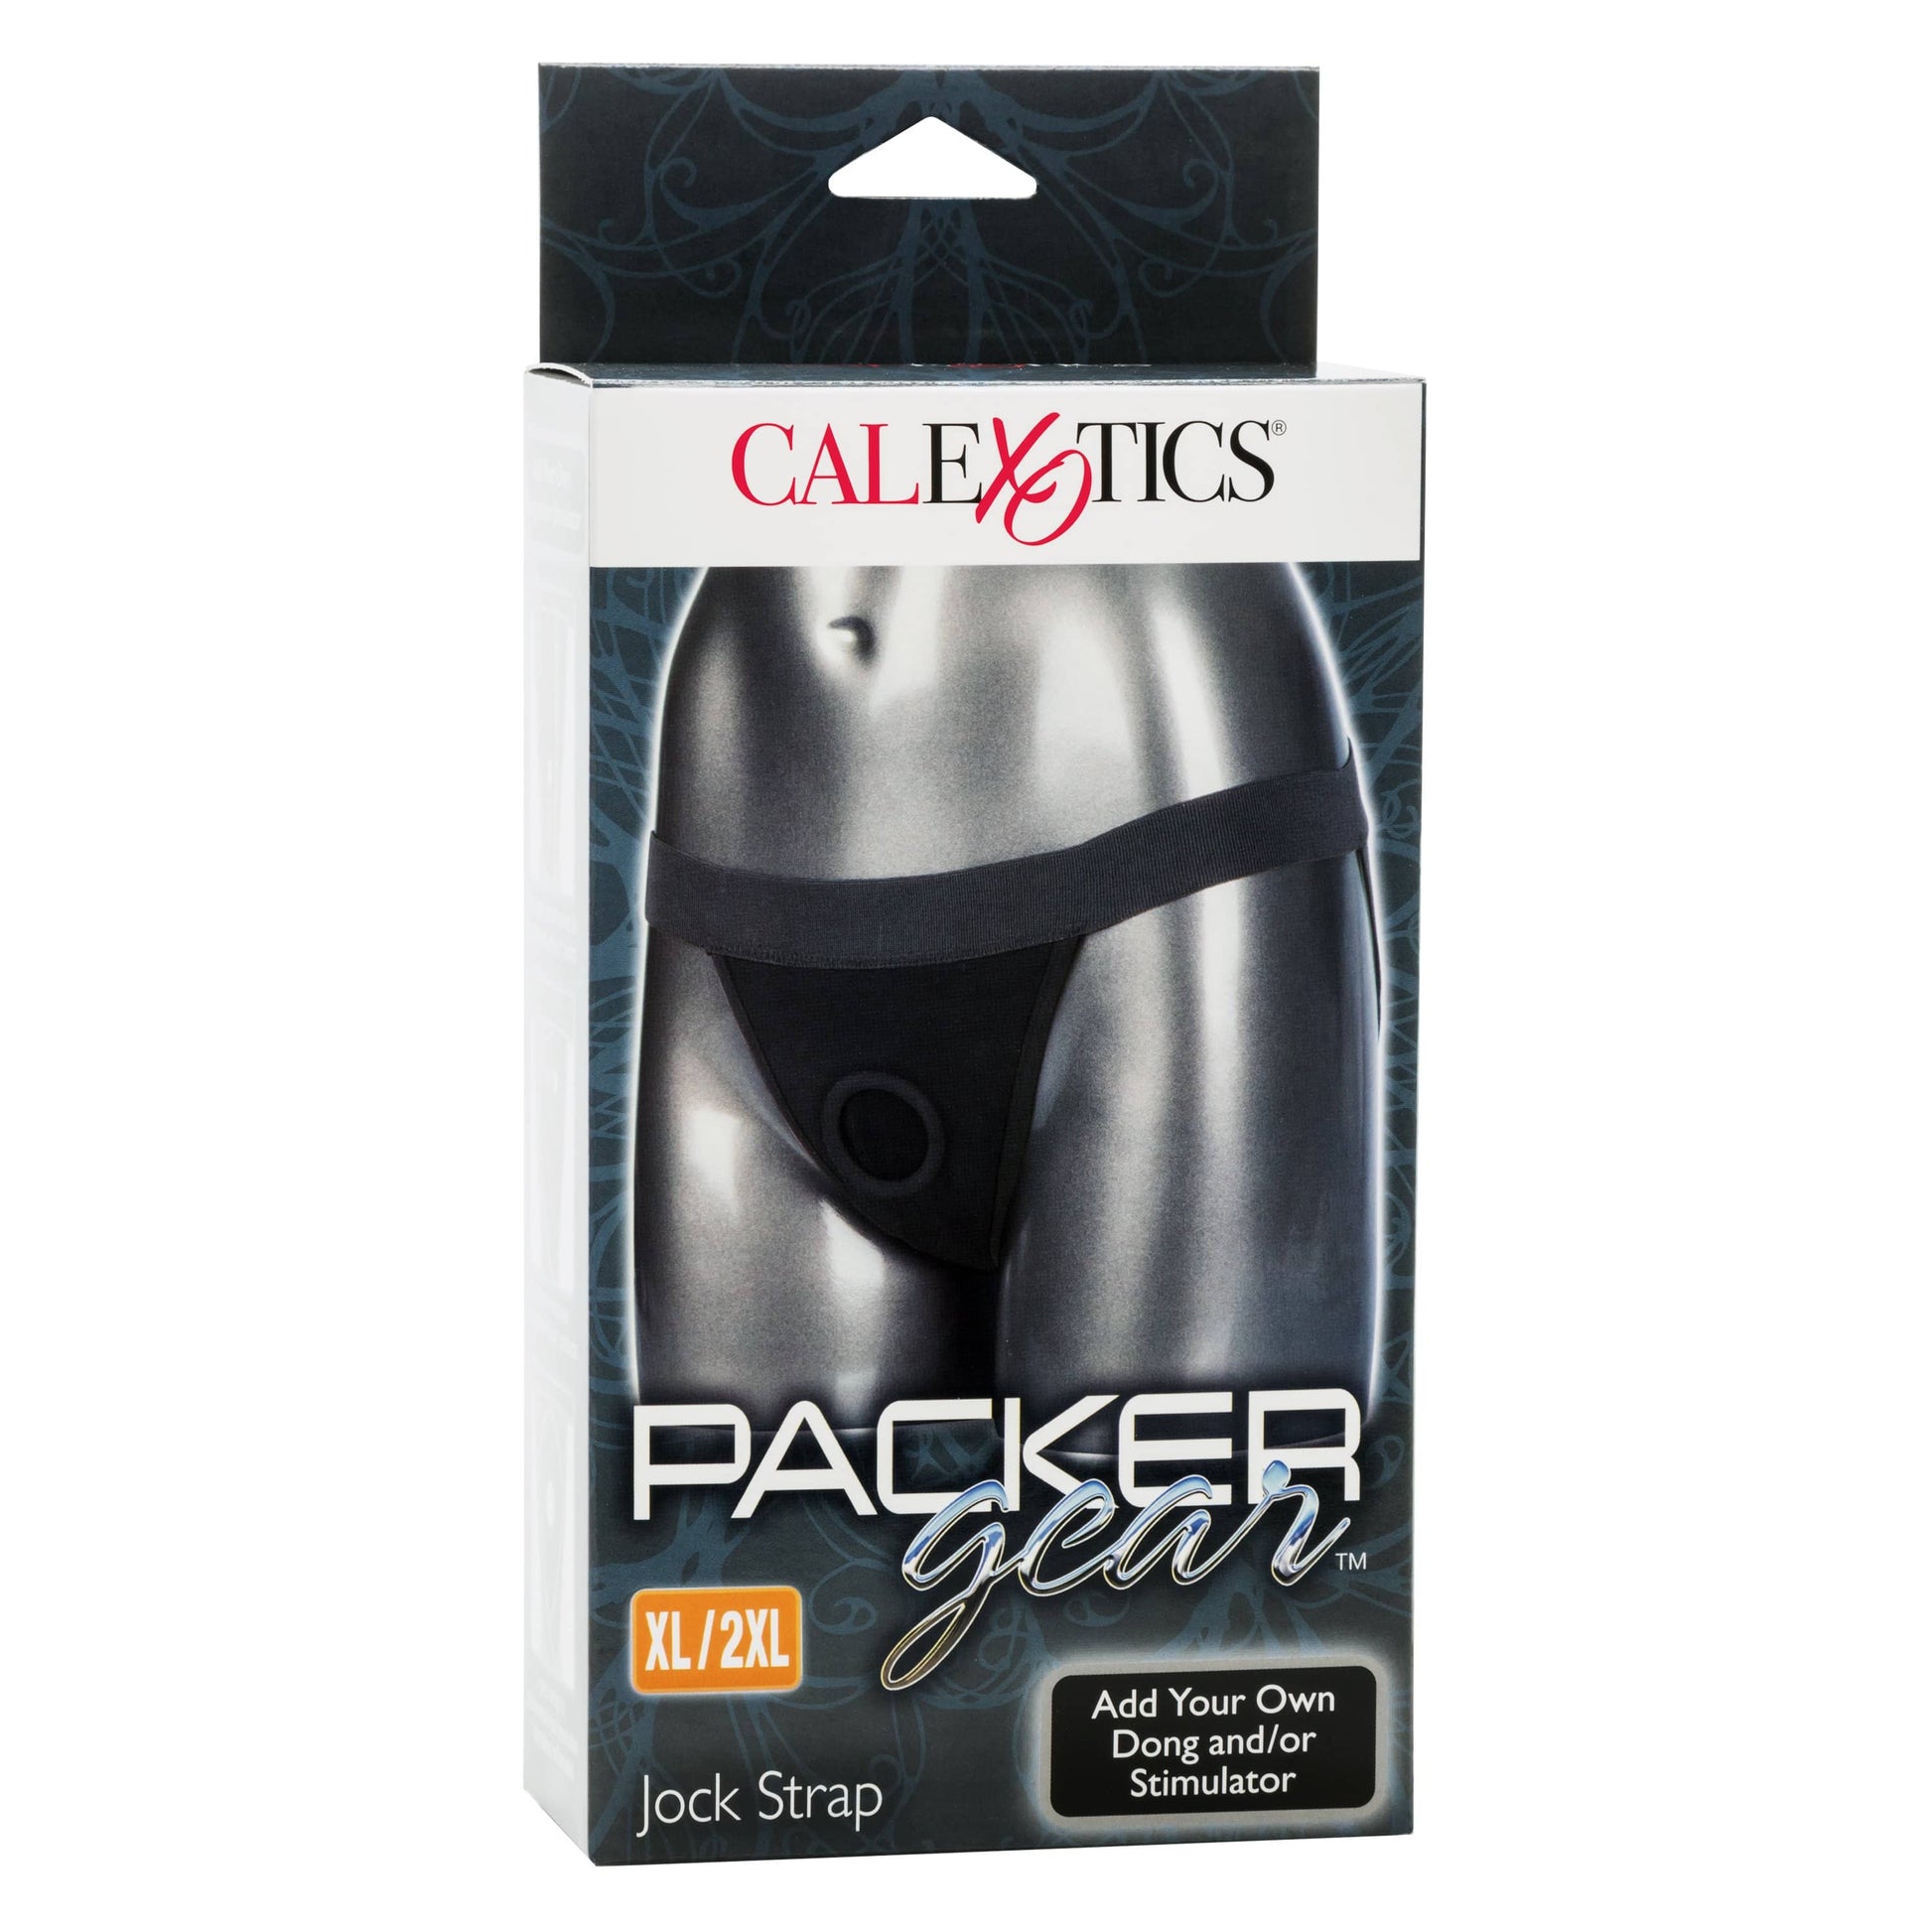 Packer Gear Jock Strap - Thorn & Feather Sex Toy Canada